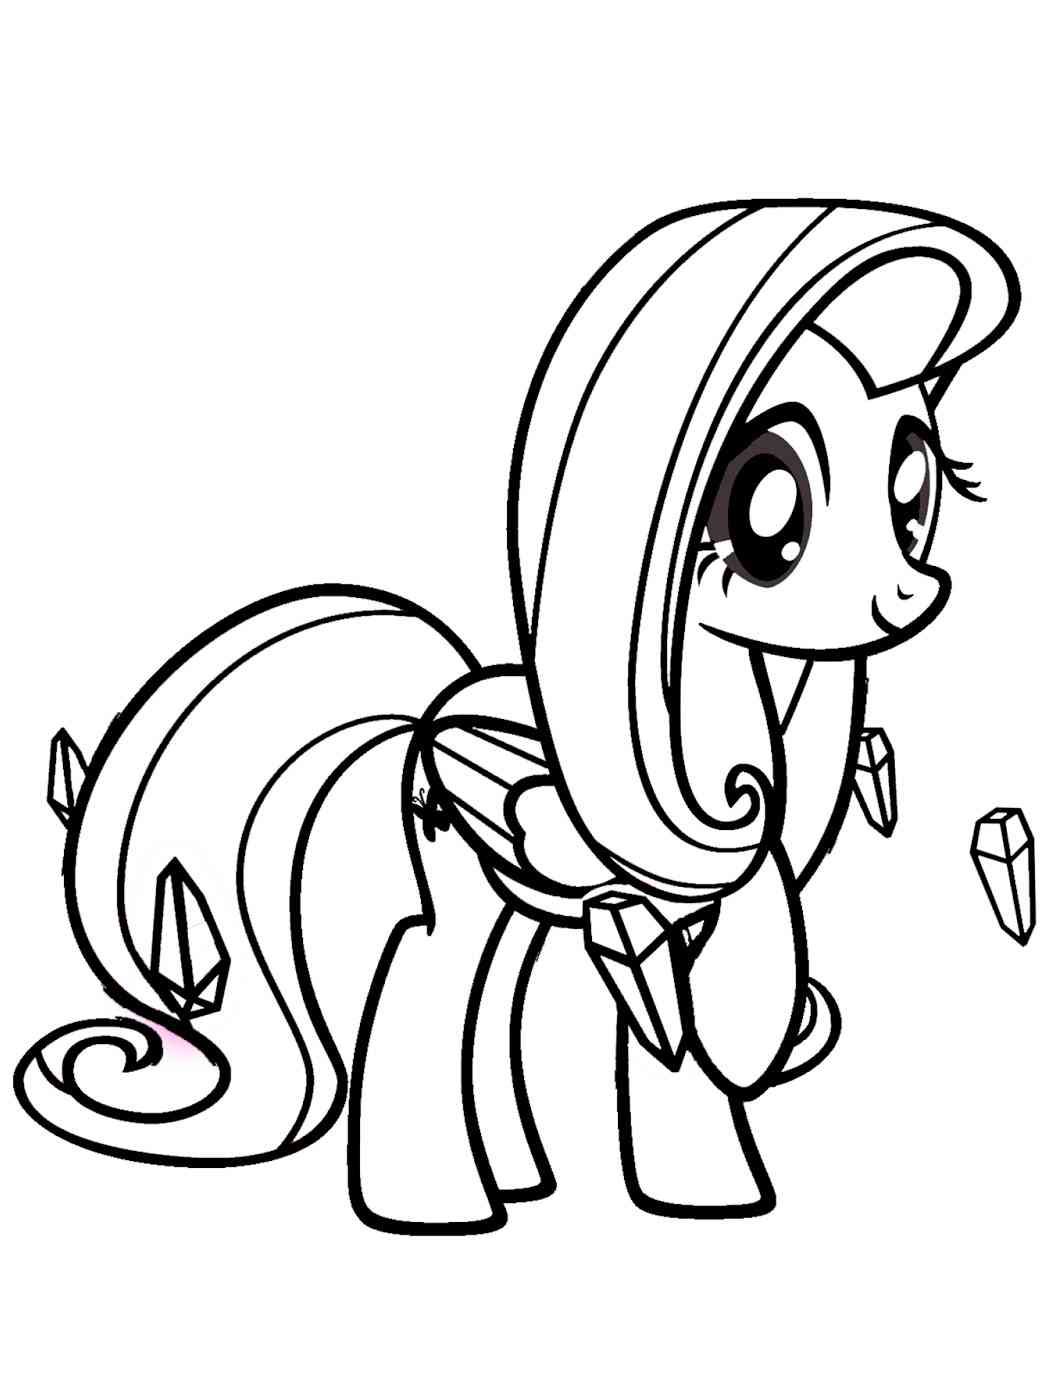 Fluttershy 6 coloring page